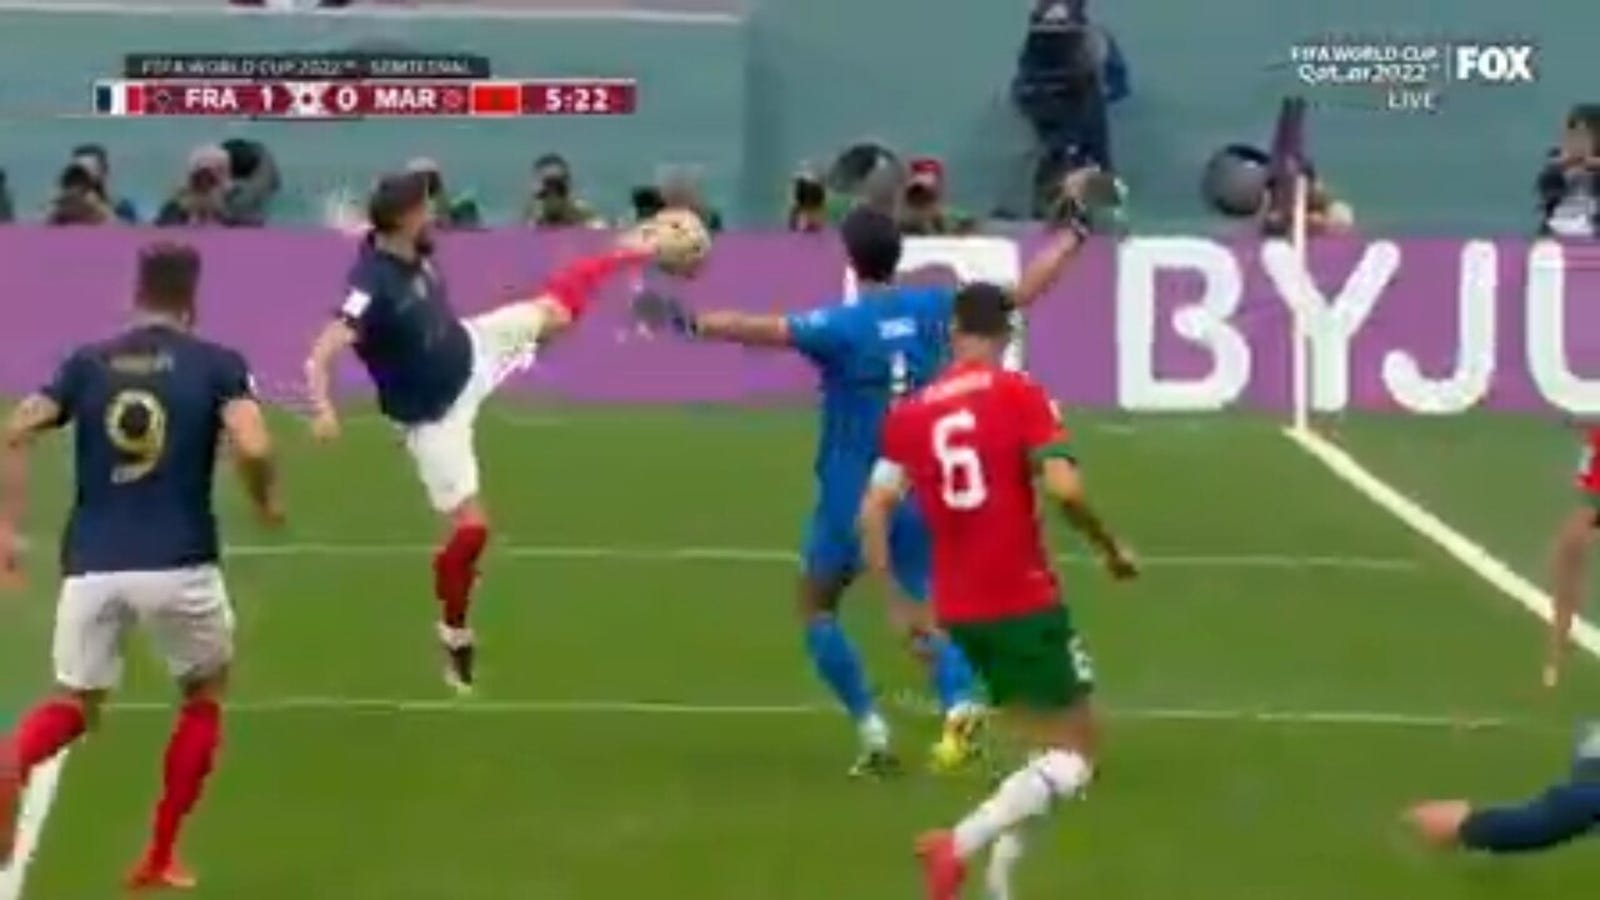 France's Theo Hernandez scores against Morocco in the 5'.